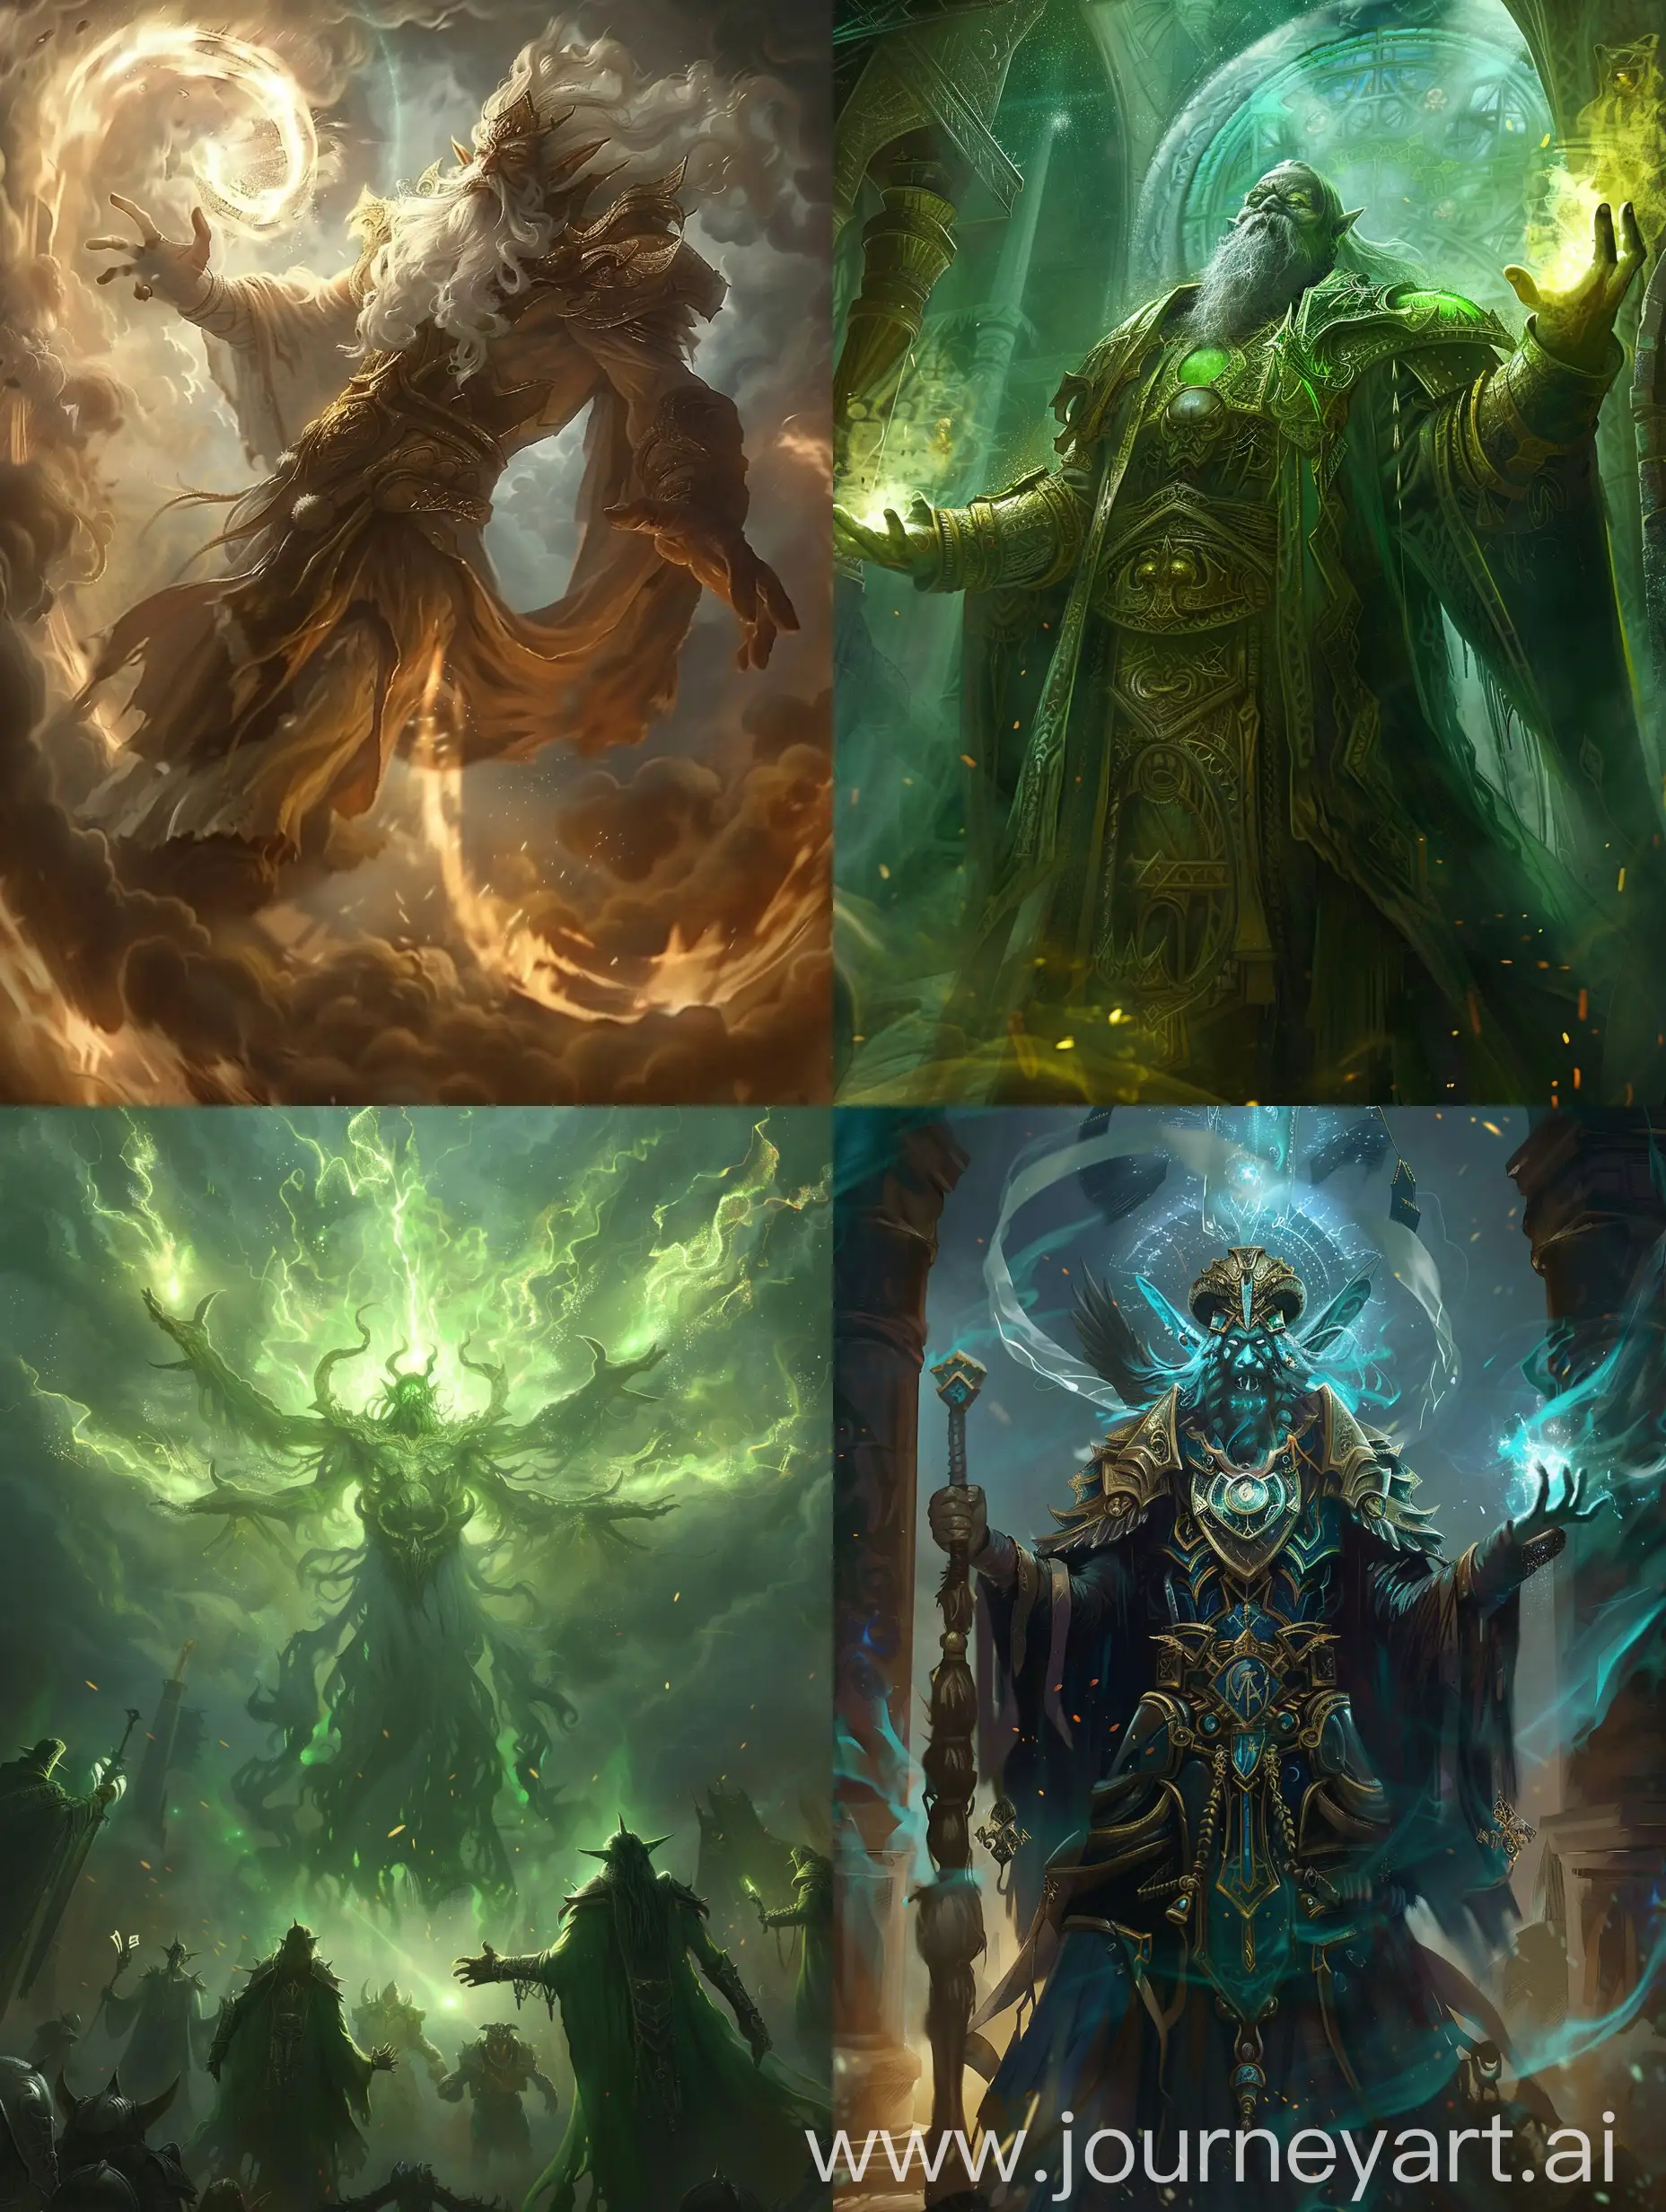 Summoning-Ancient-Deities-A-Metaphysical-Journey-in-the-Style-of-World-of-Warcraft